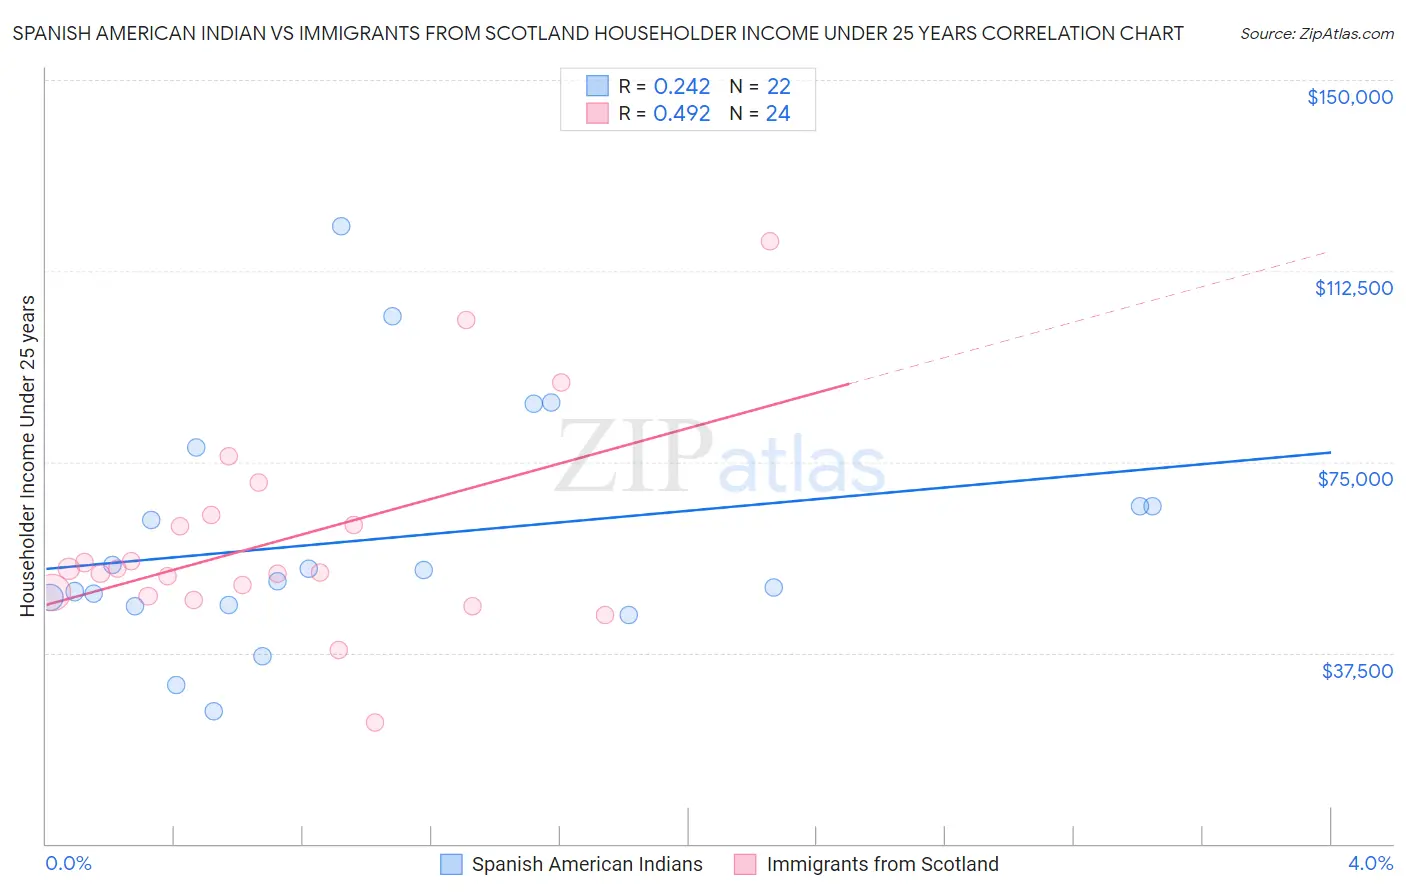 Spanish American Indian vs Immigrants from Scotland Householder Income Under 25 years